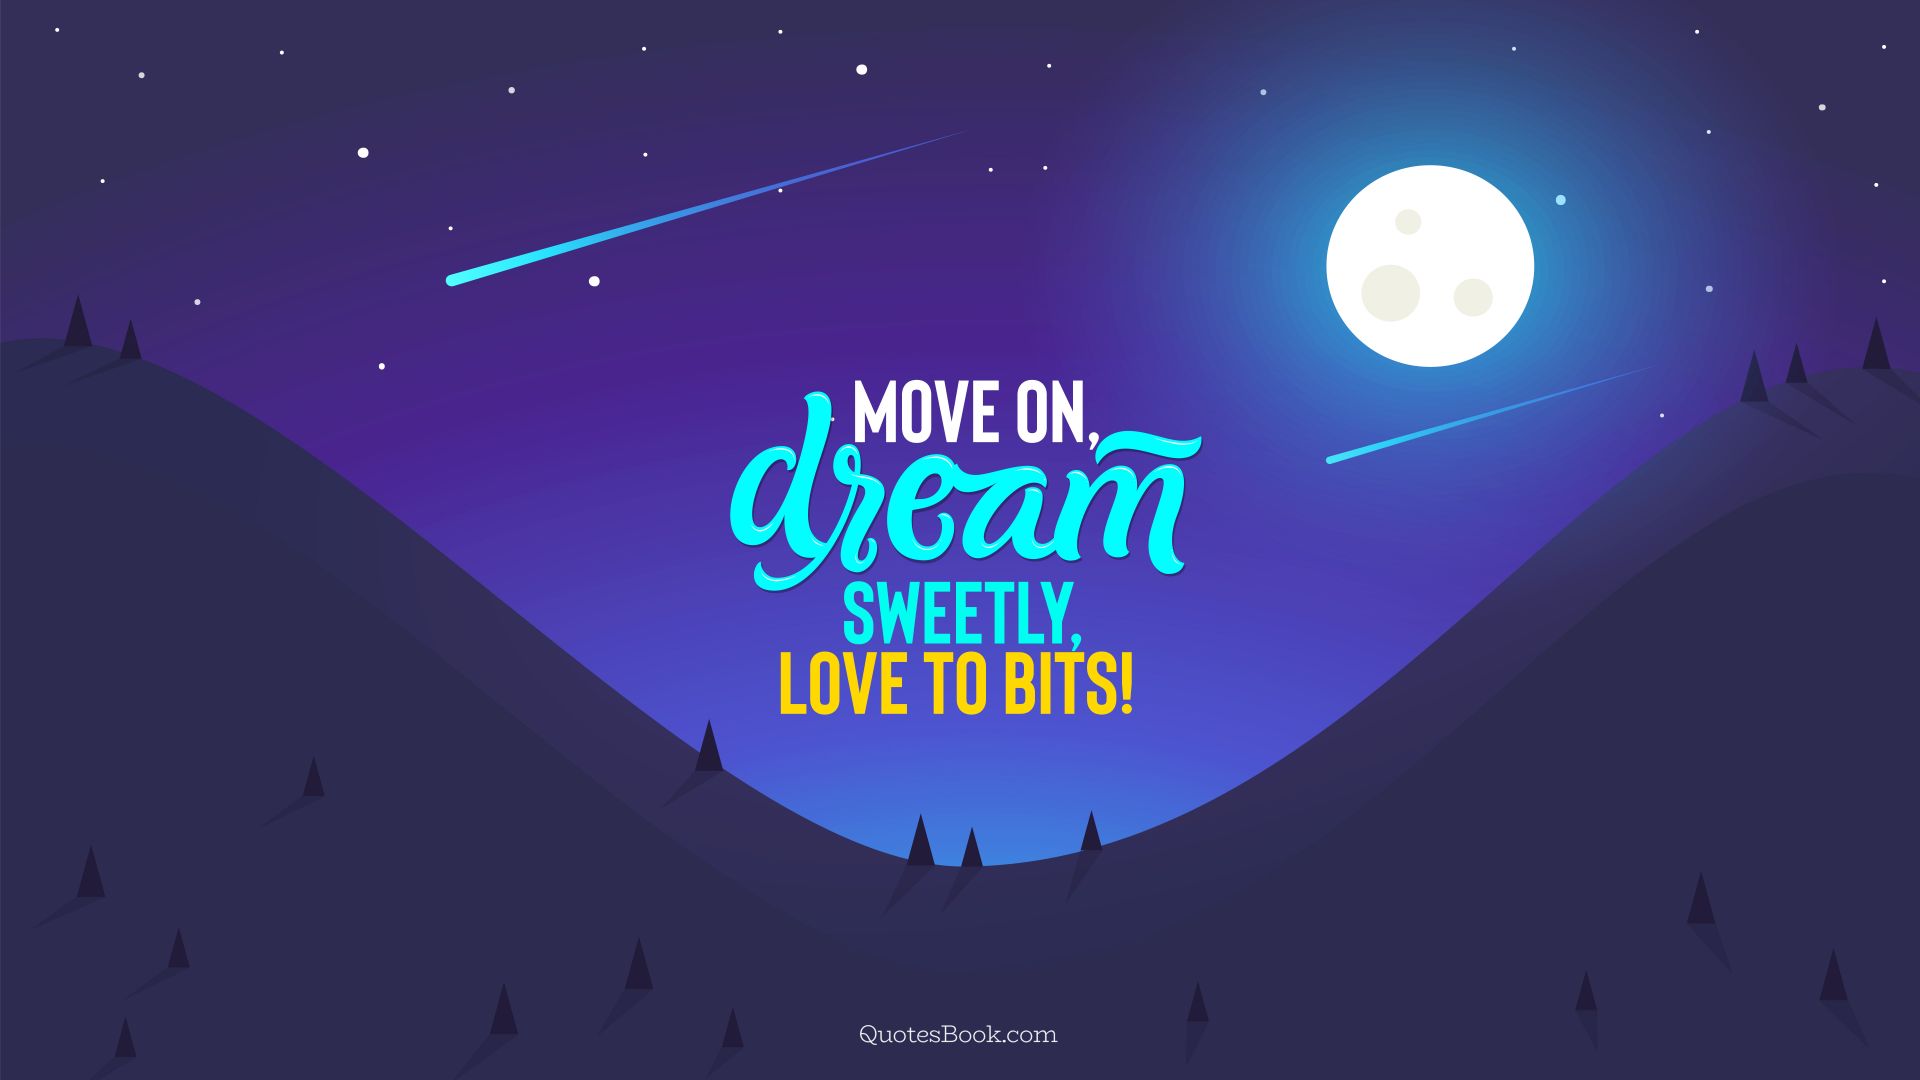 Move on, dream sweetly, love to bits!. - Quote by QuotesBook